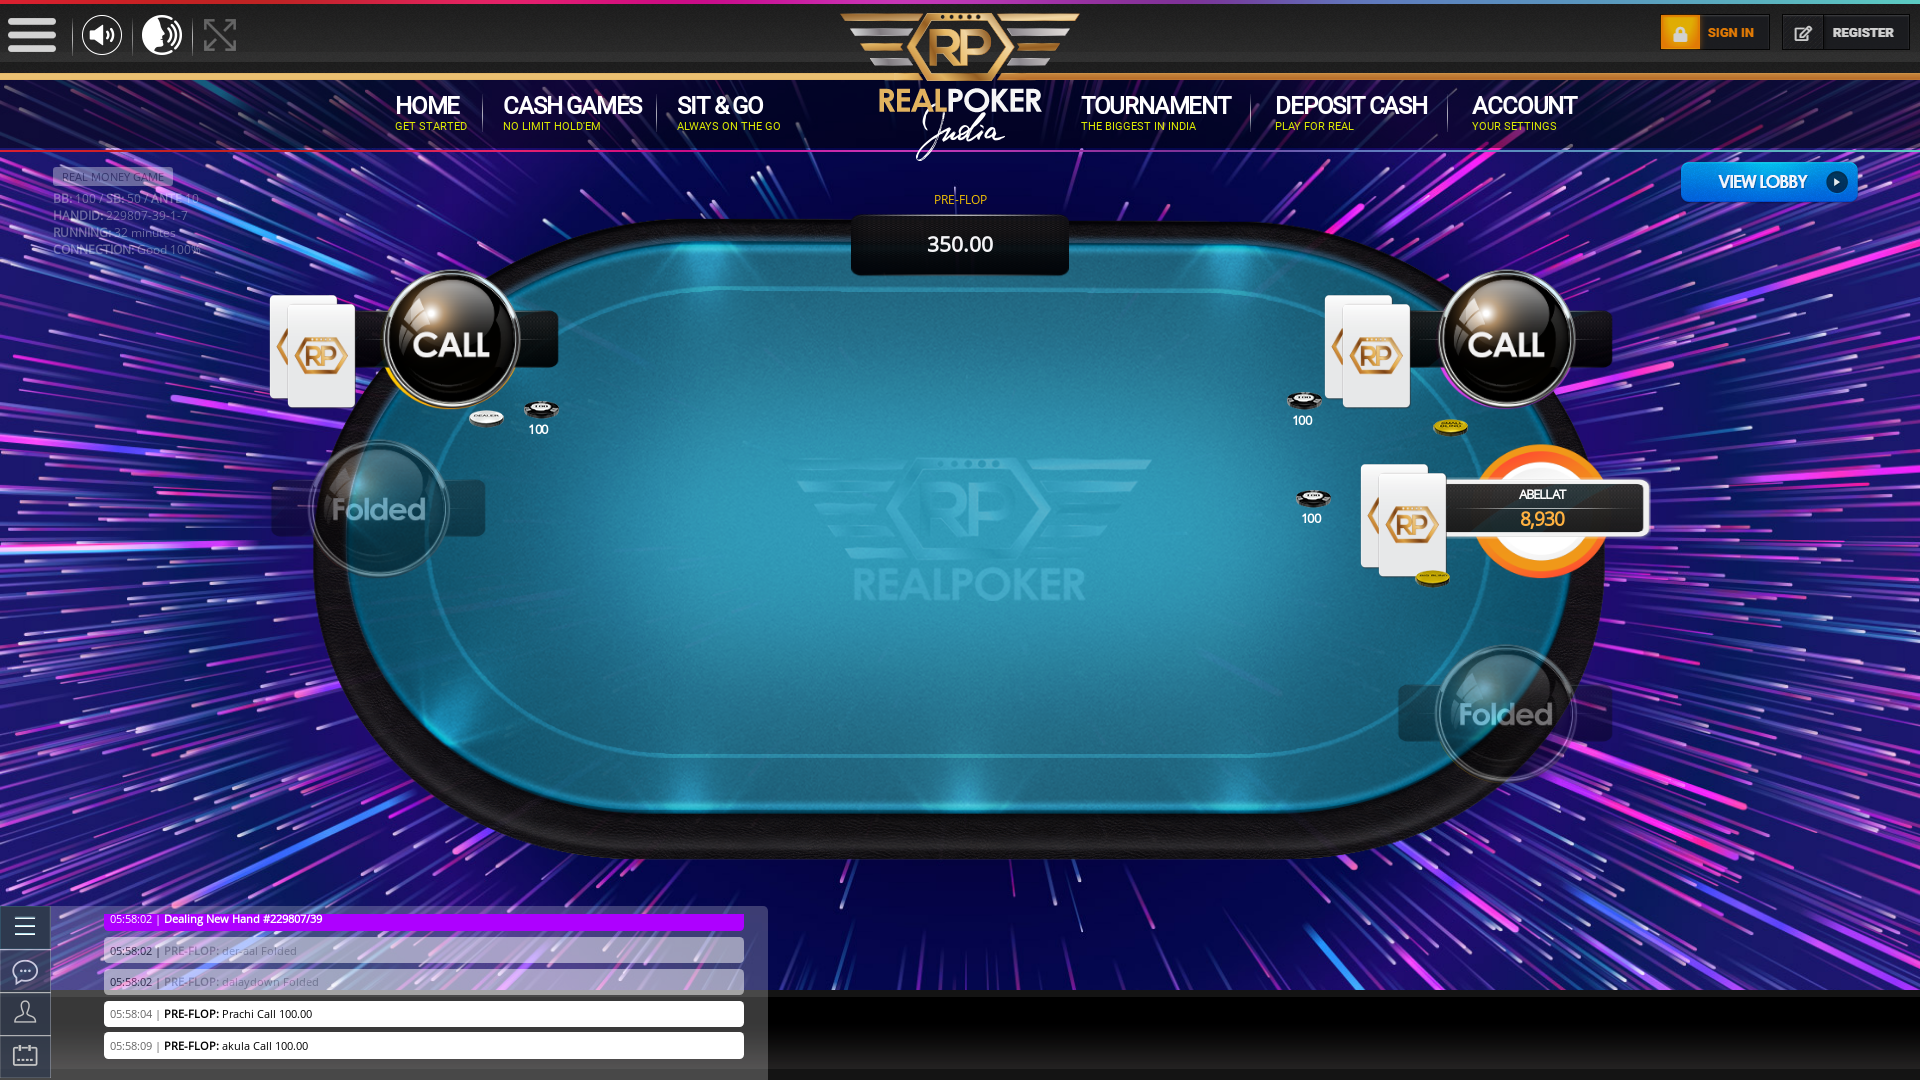 Real poker 10 player table in the 31st minute